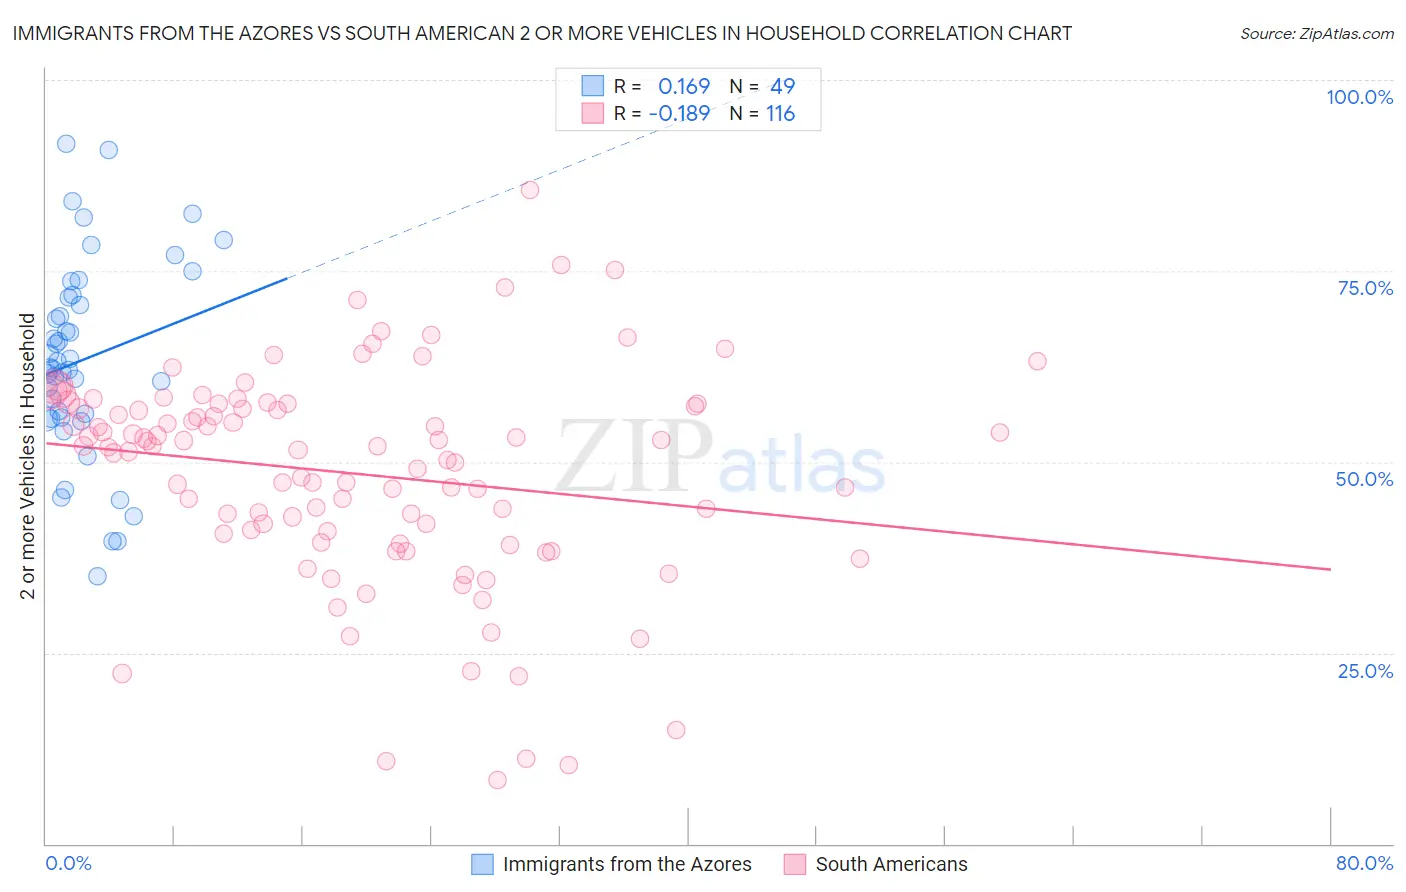 Immigrants from the Azores vs South American 2 or more Vehicles in Household